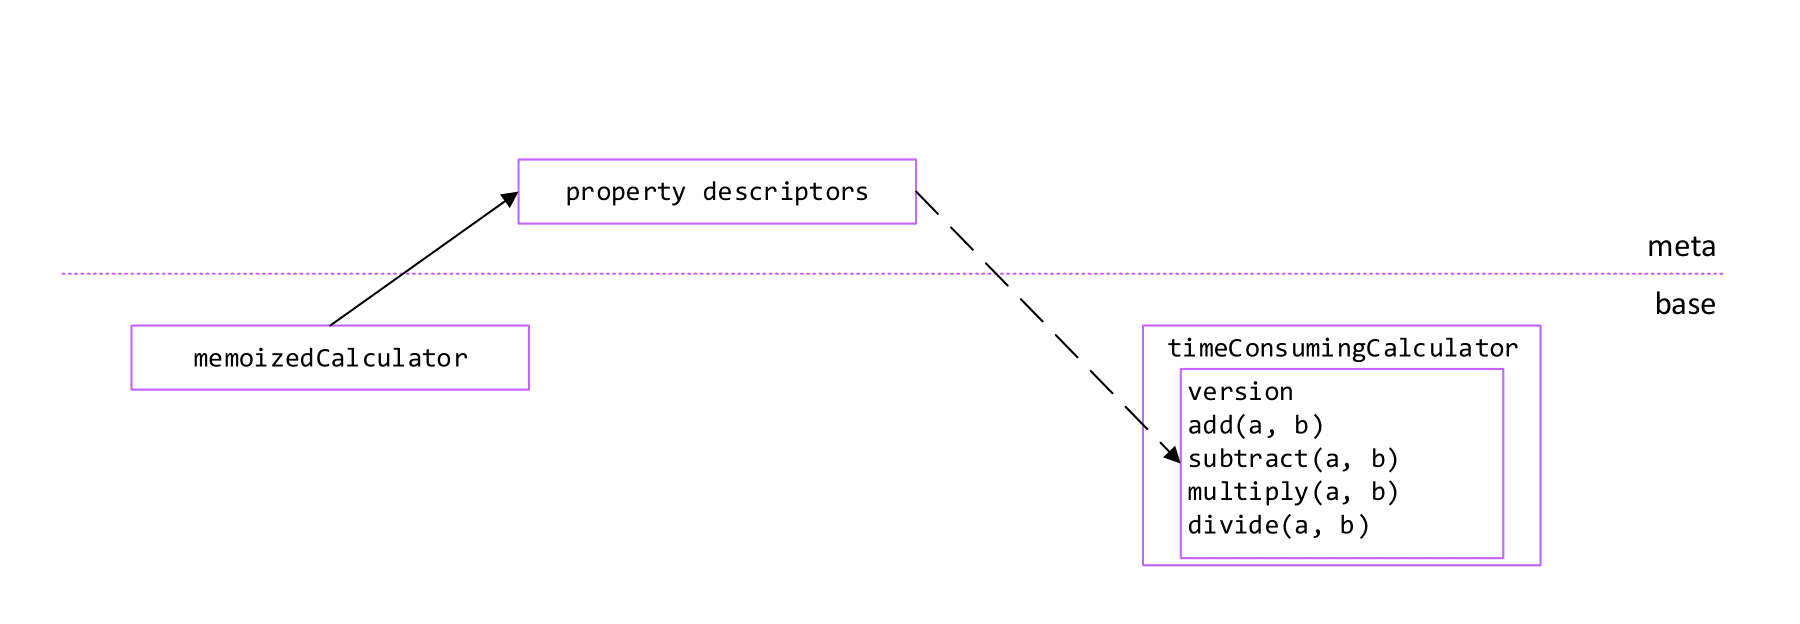 Static proxy weak linkage with target object - before extending target